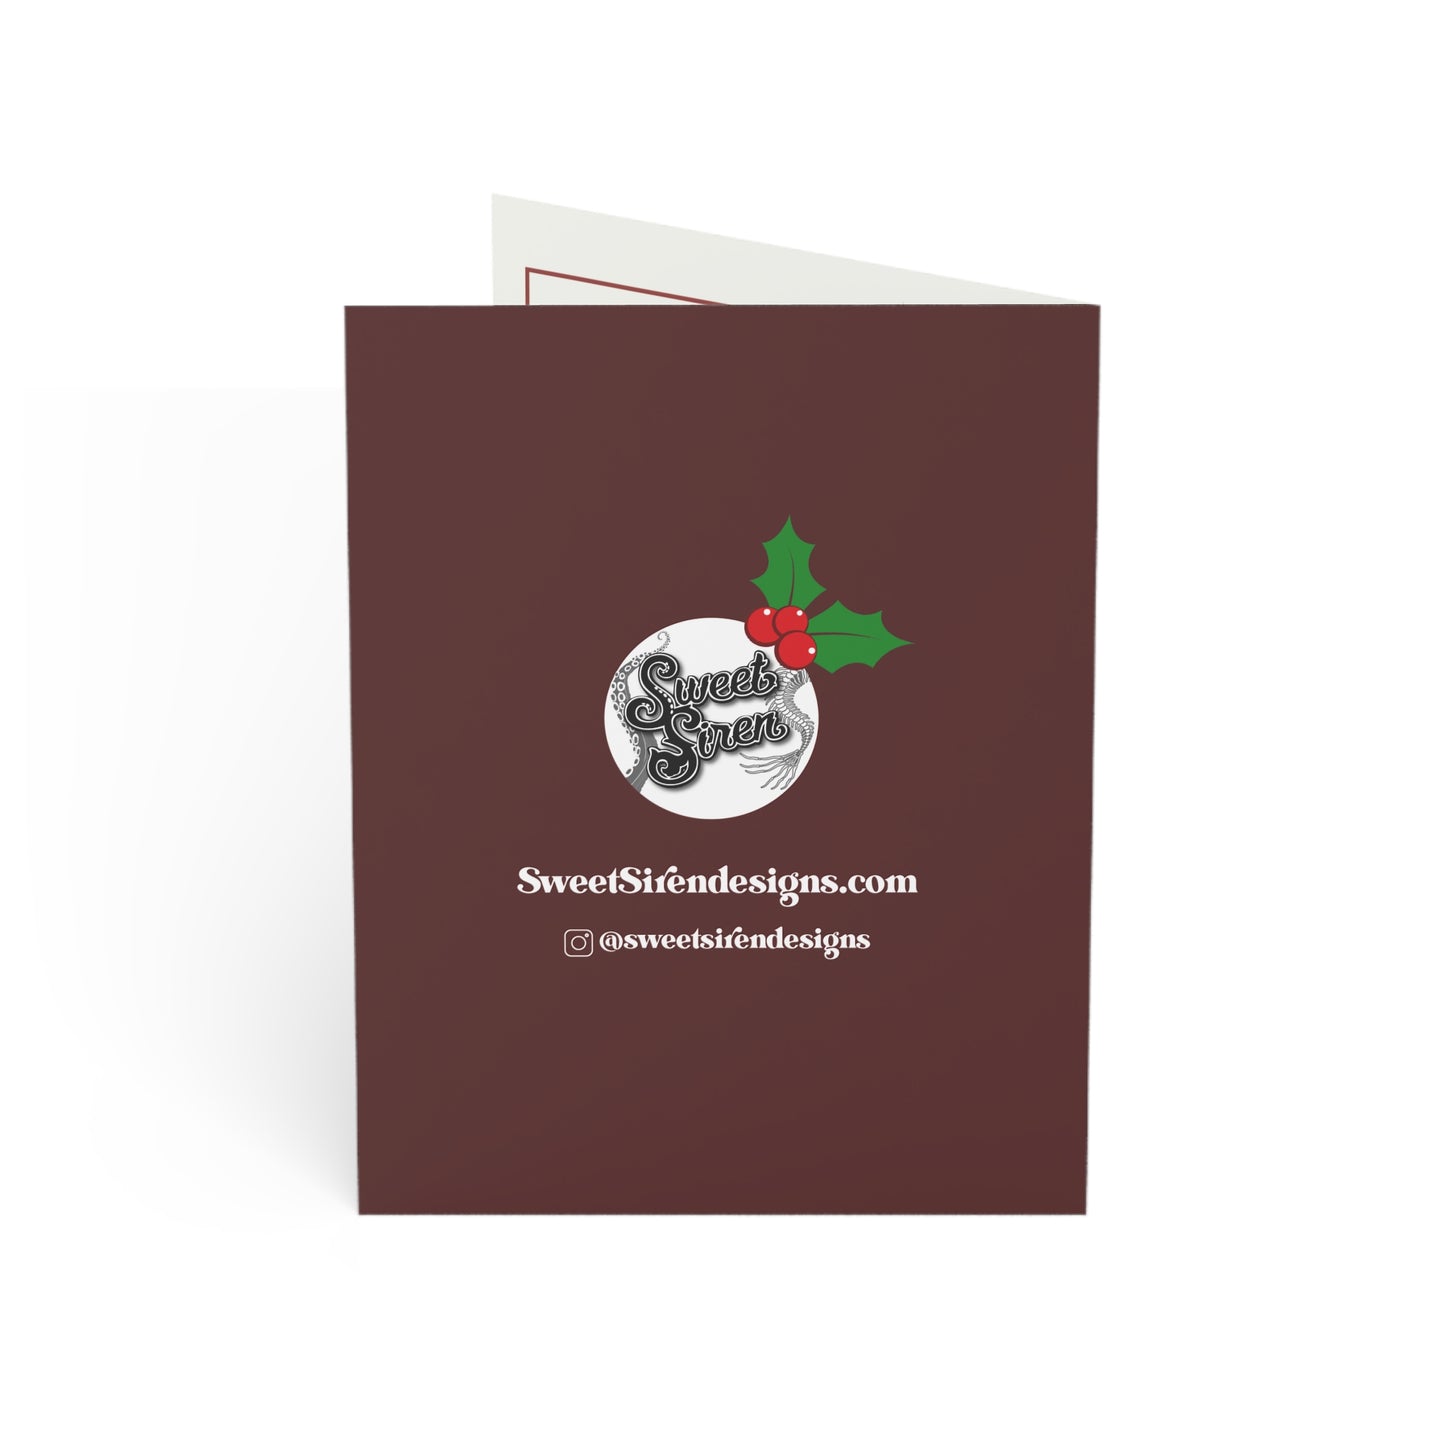 Hot Buttered Rum Season - Greeting Cards (1, 10, 30, and 50pcs) - Burgendy